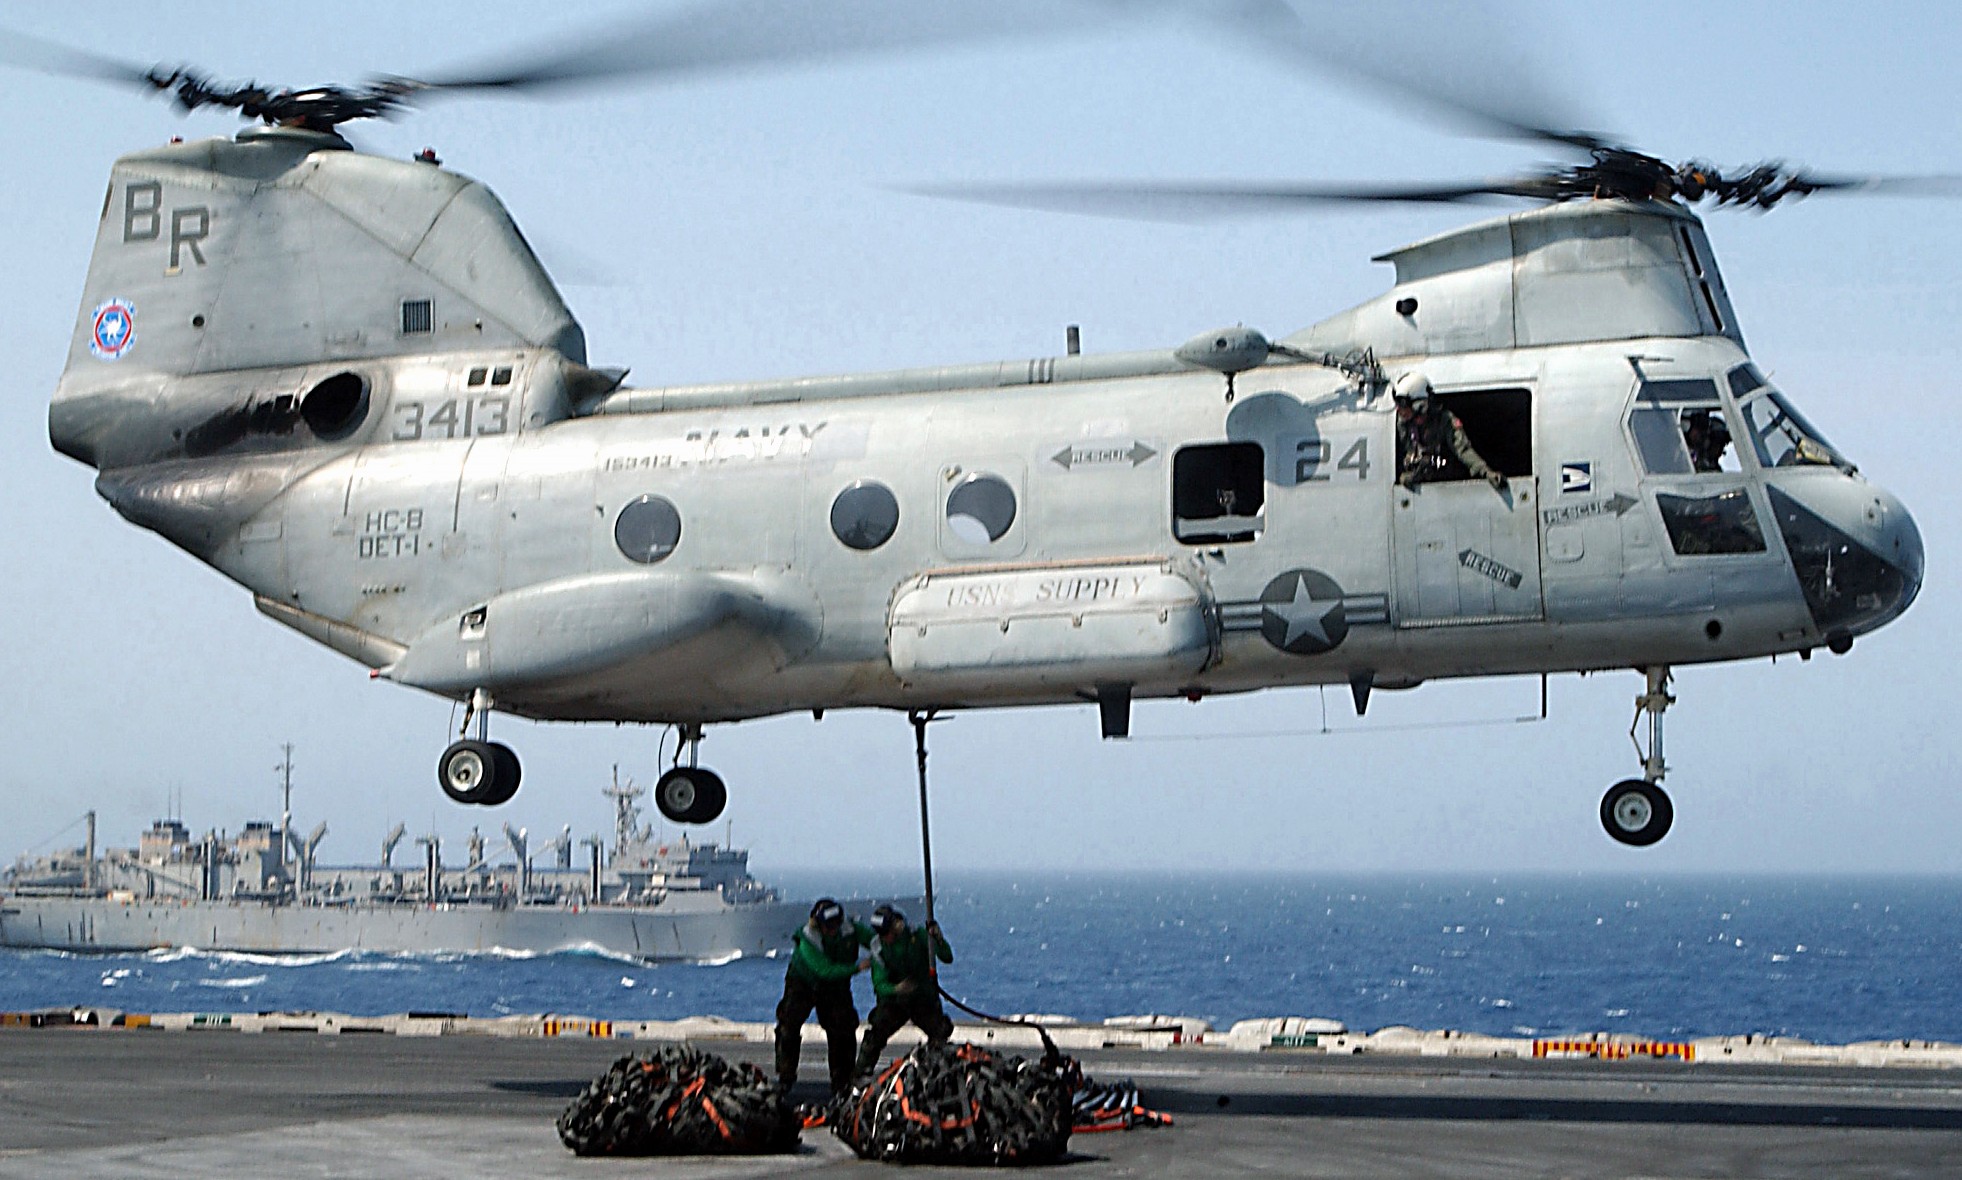 hc-8 dragon whales helicopter combat support squadron navy ch-46d sea knight 11